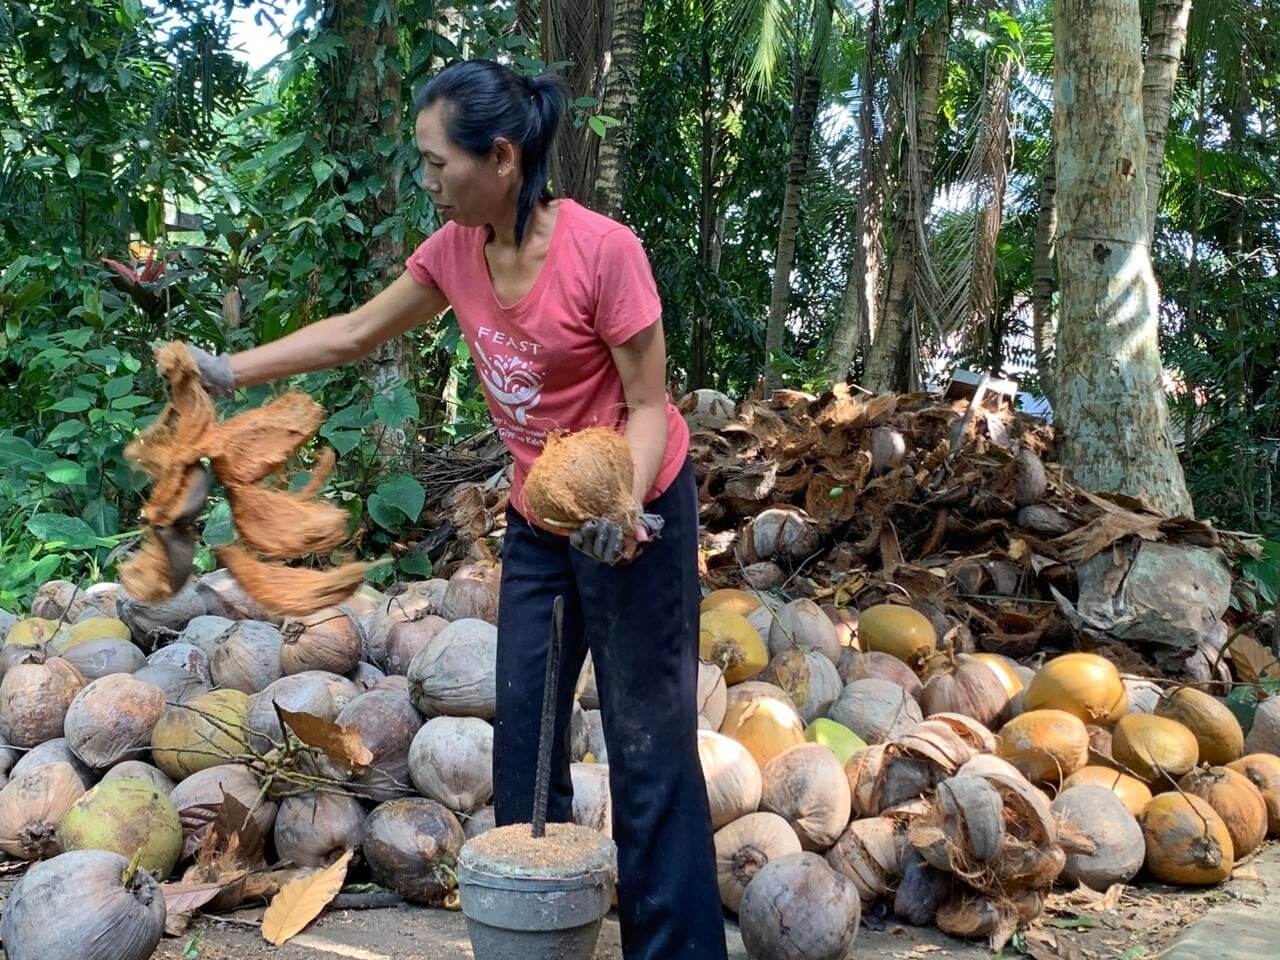 Indonesian woman working with coconuts